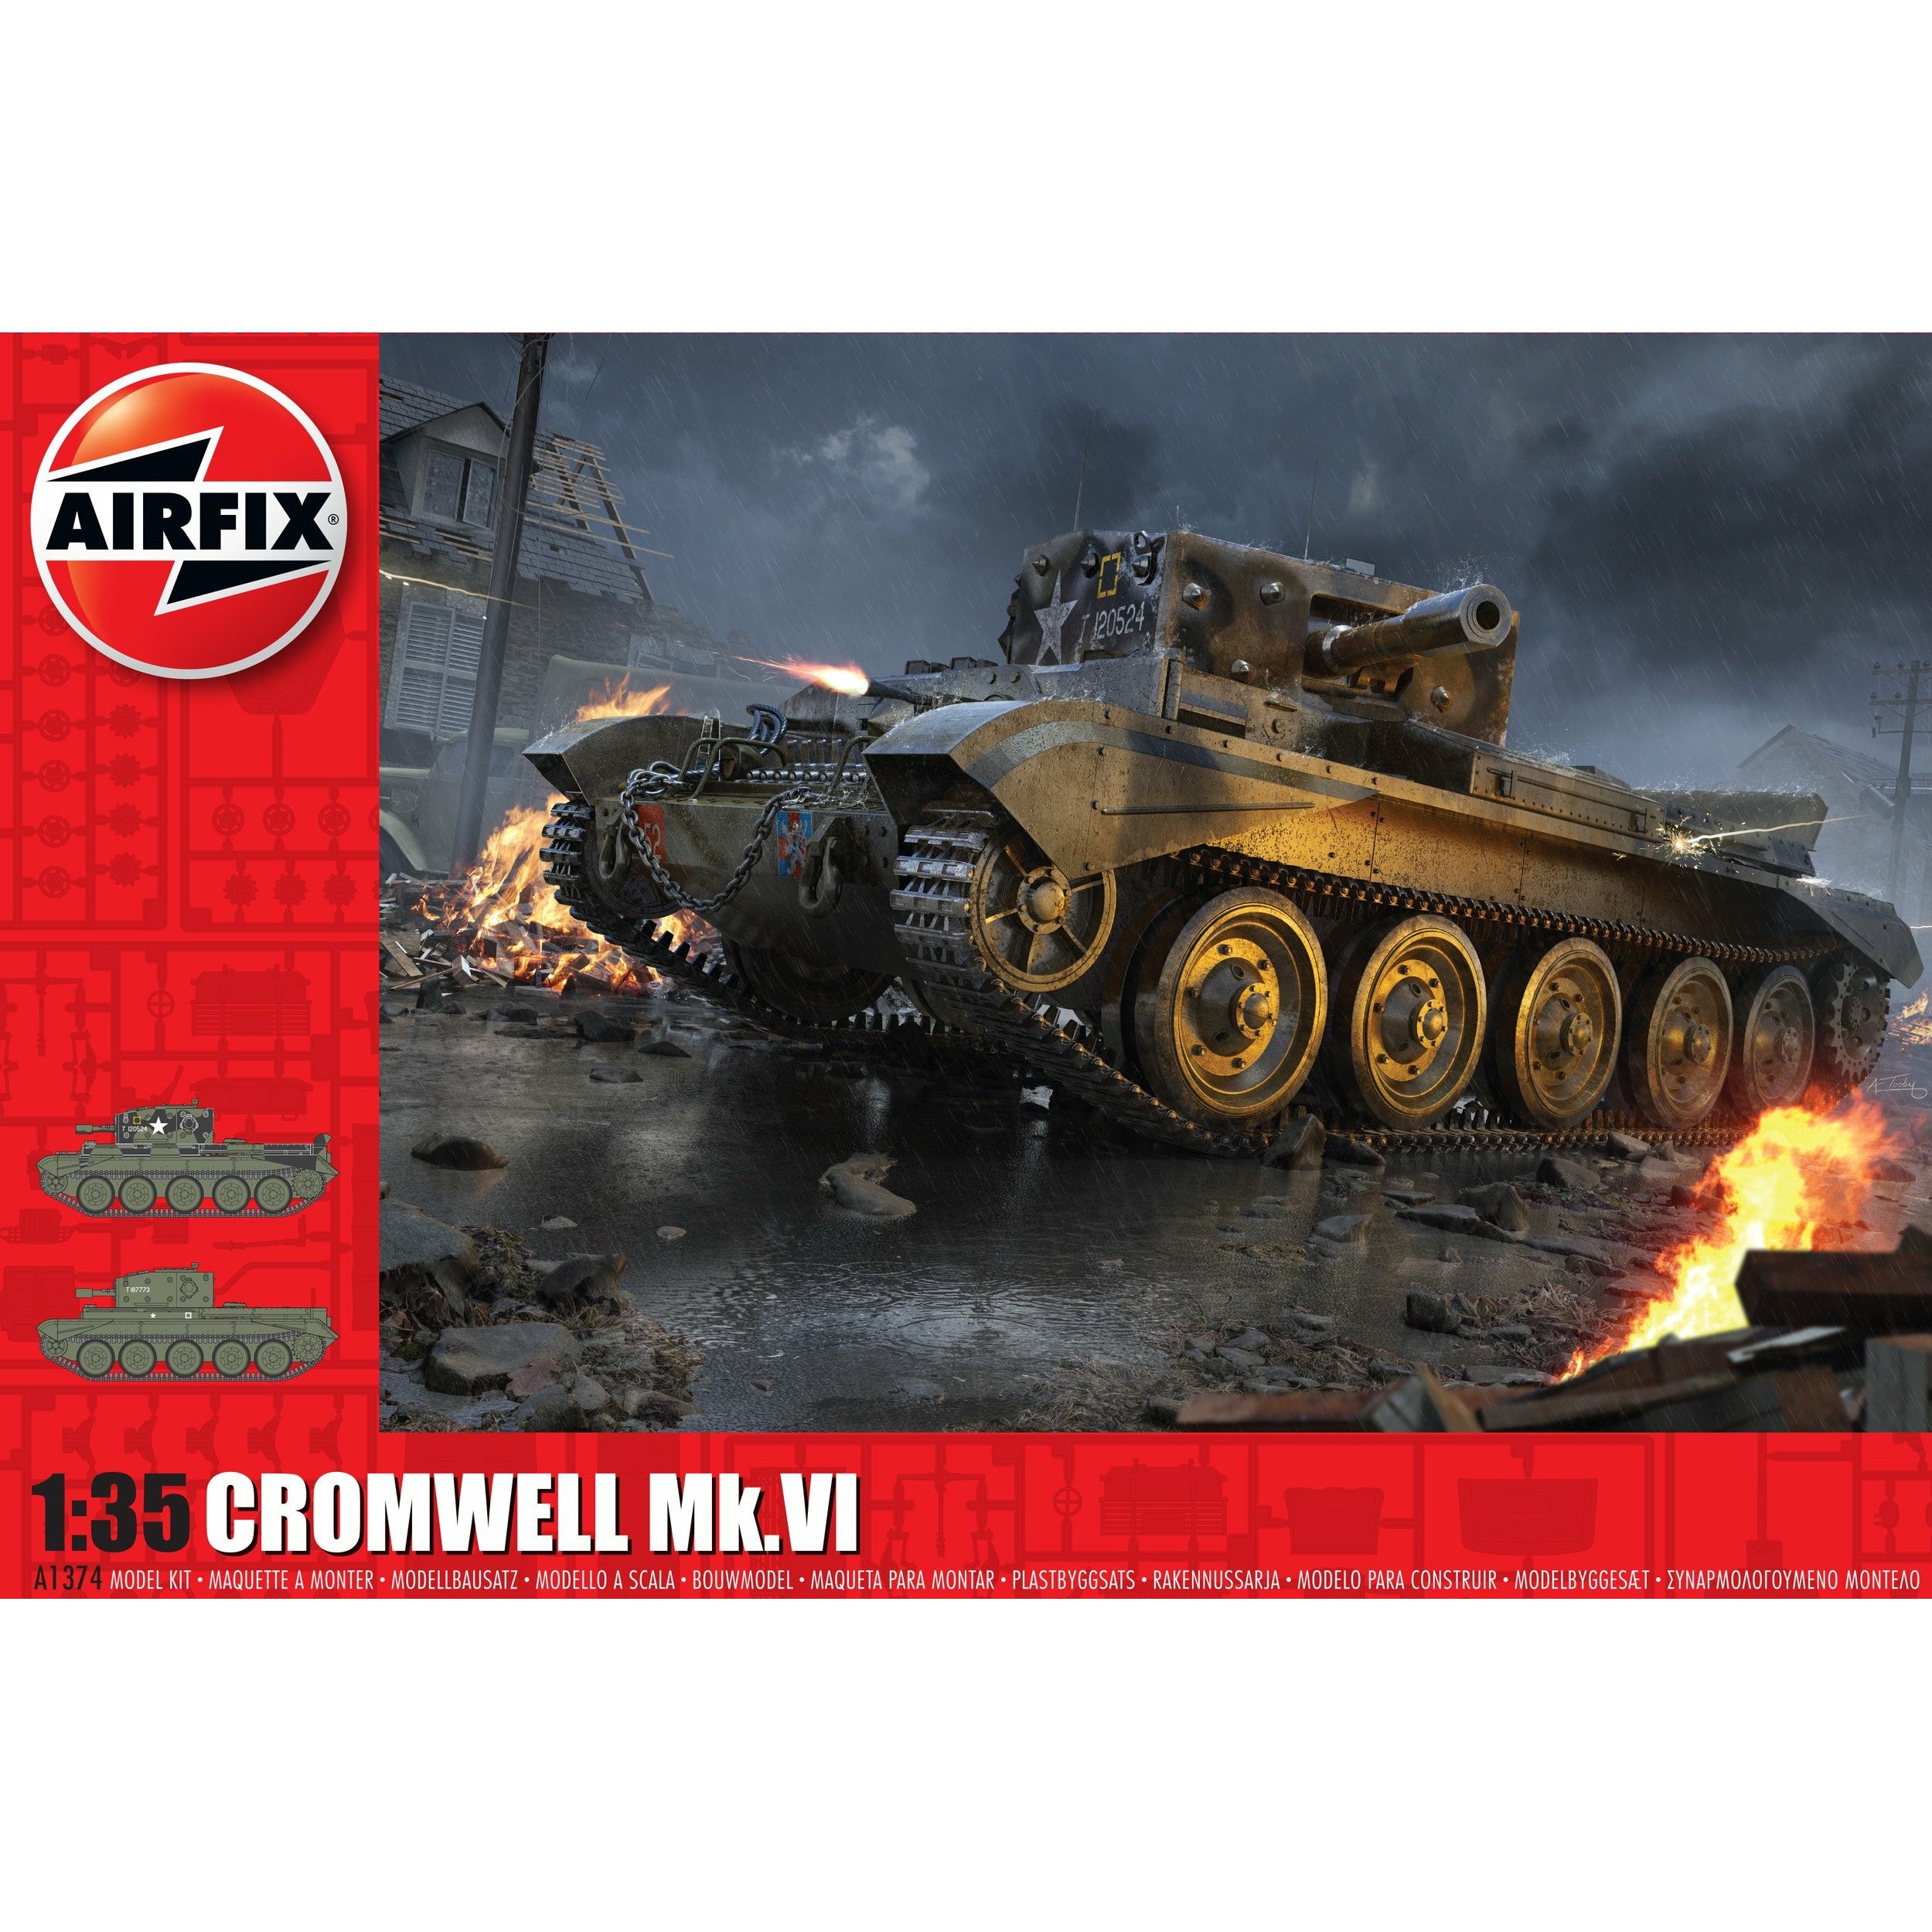 Cromwell Mk.VI 1/35 #A1374 by Airfix